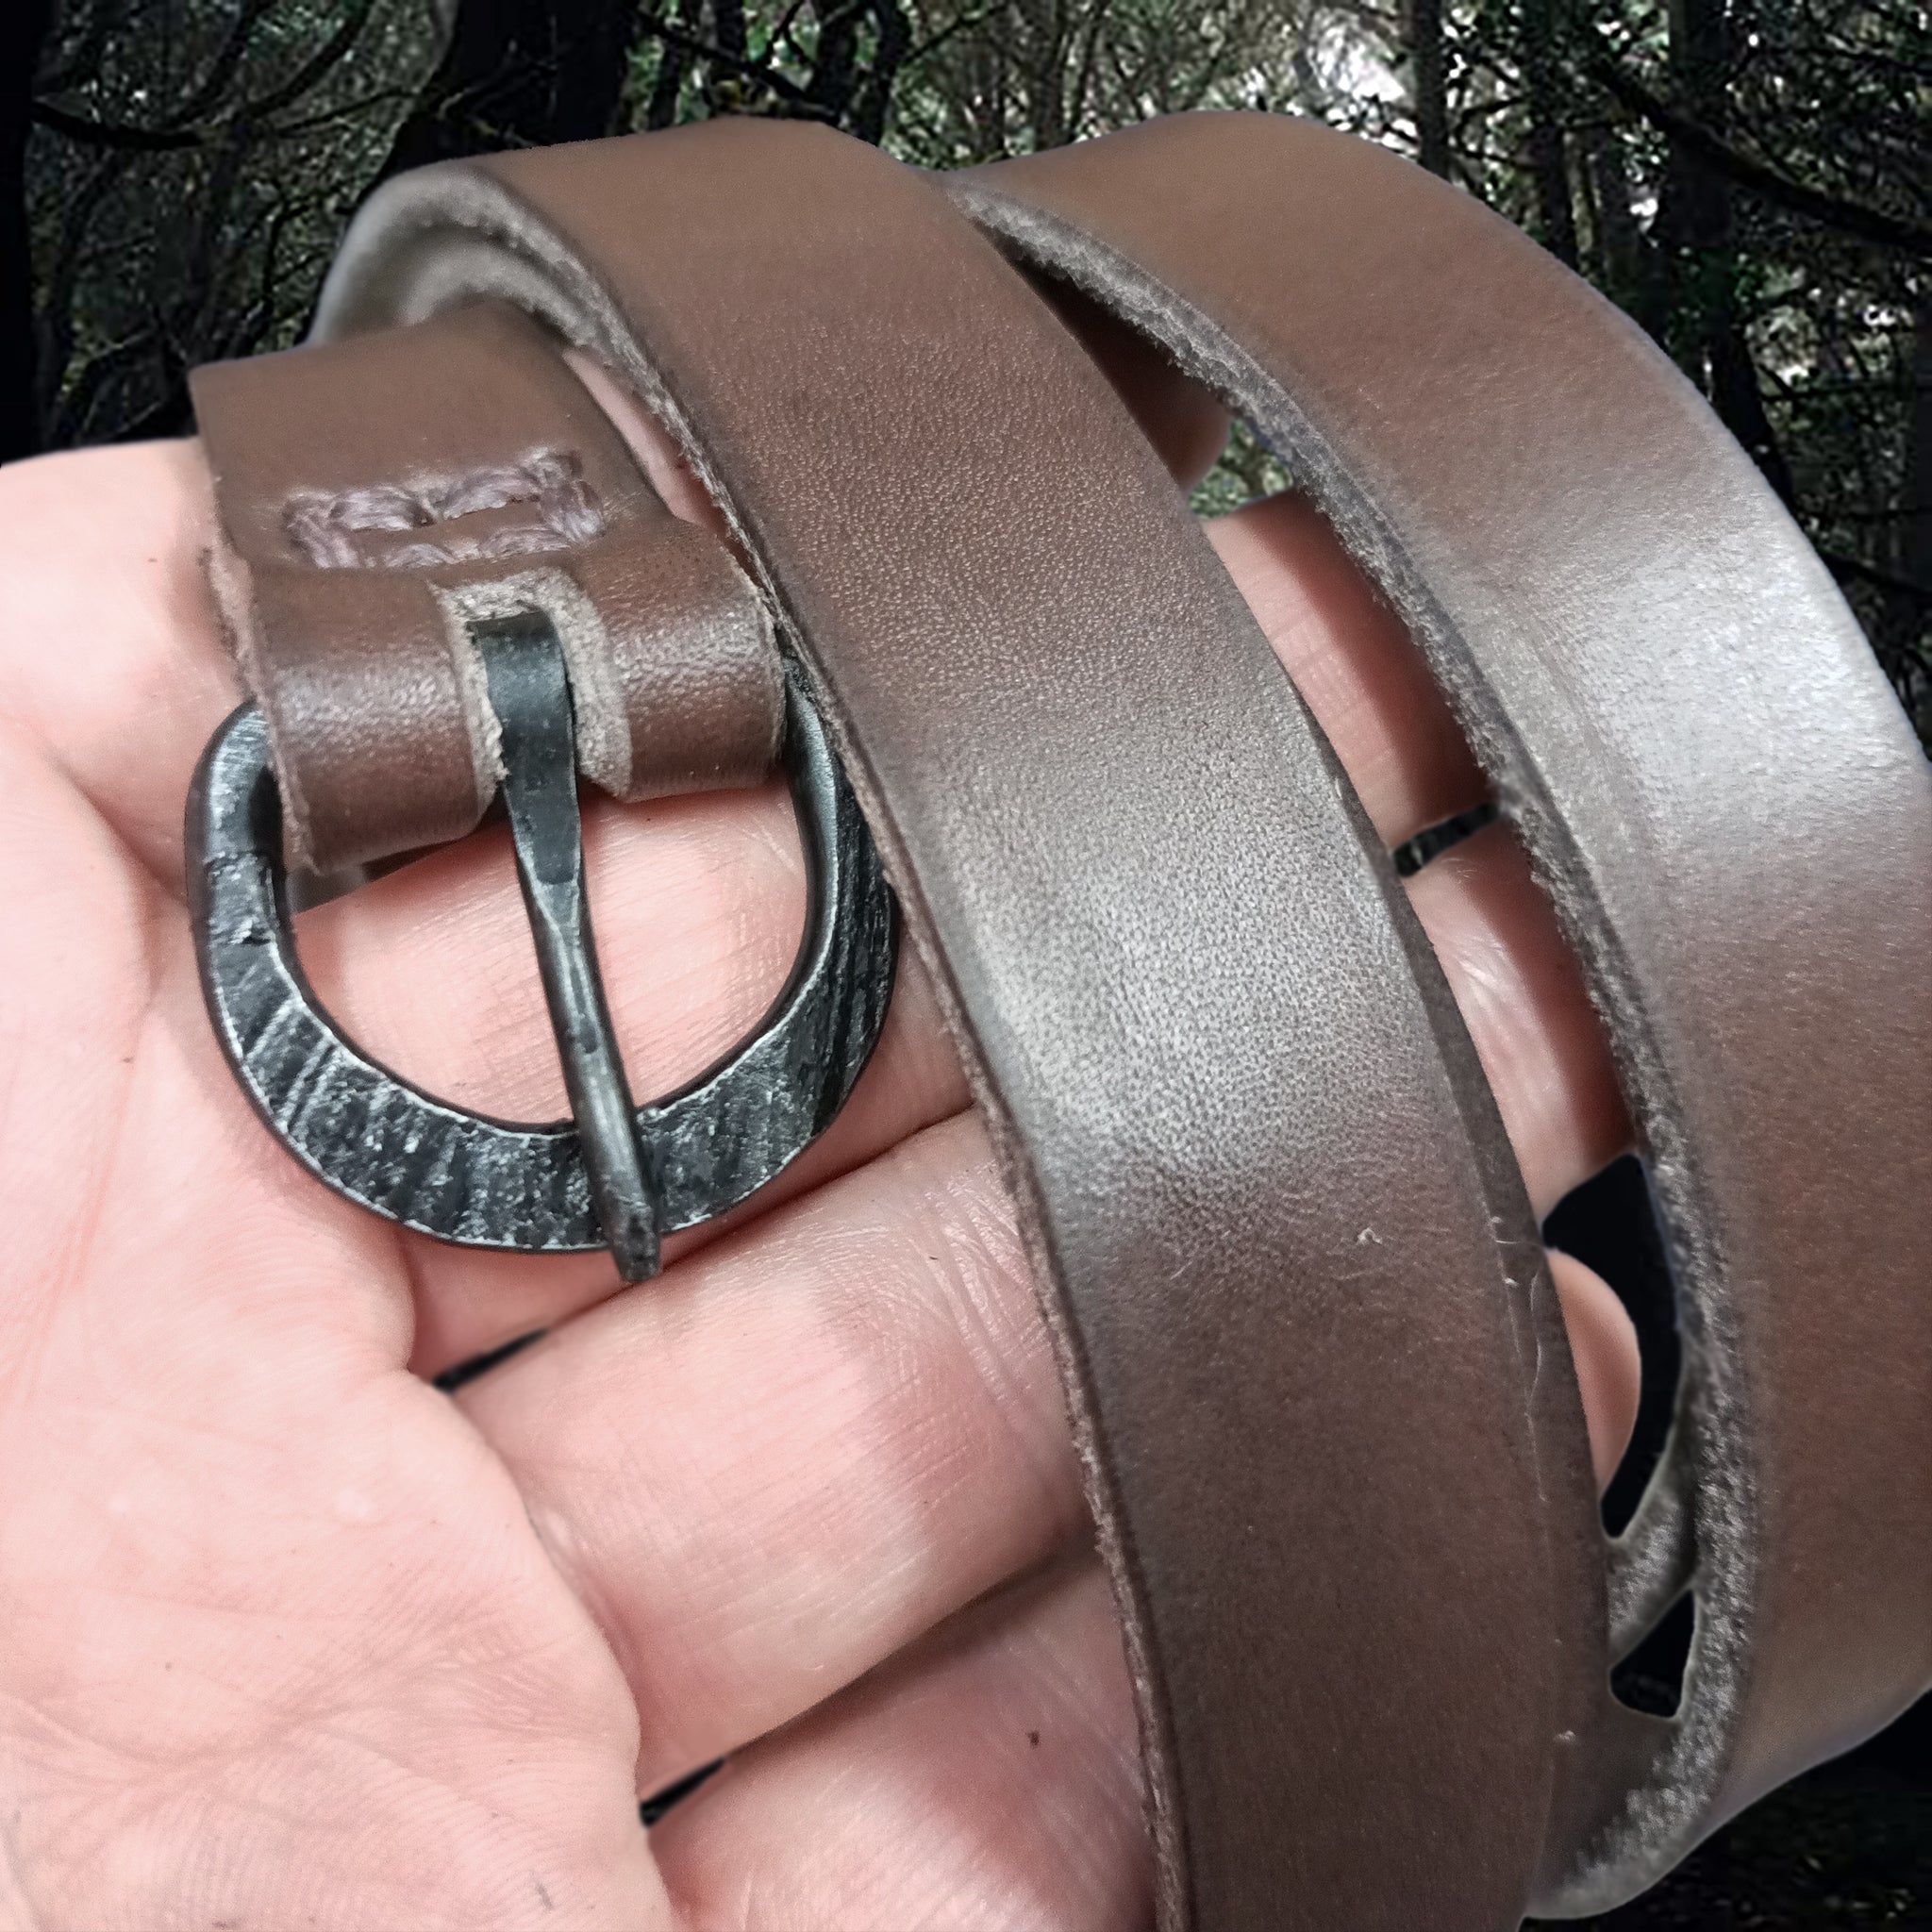 Long Viking / Medieval Belt with Hand-Forged Iron Buckle - 20mm (0.75 inch) Width on Hand